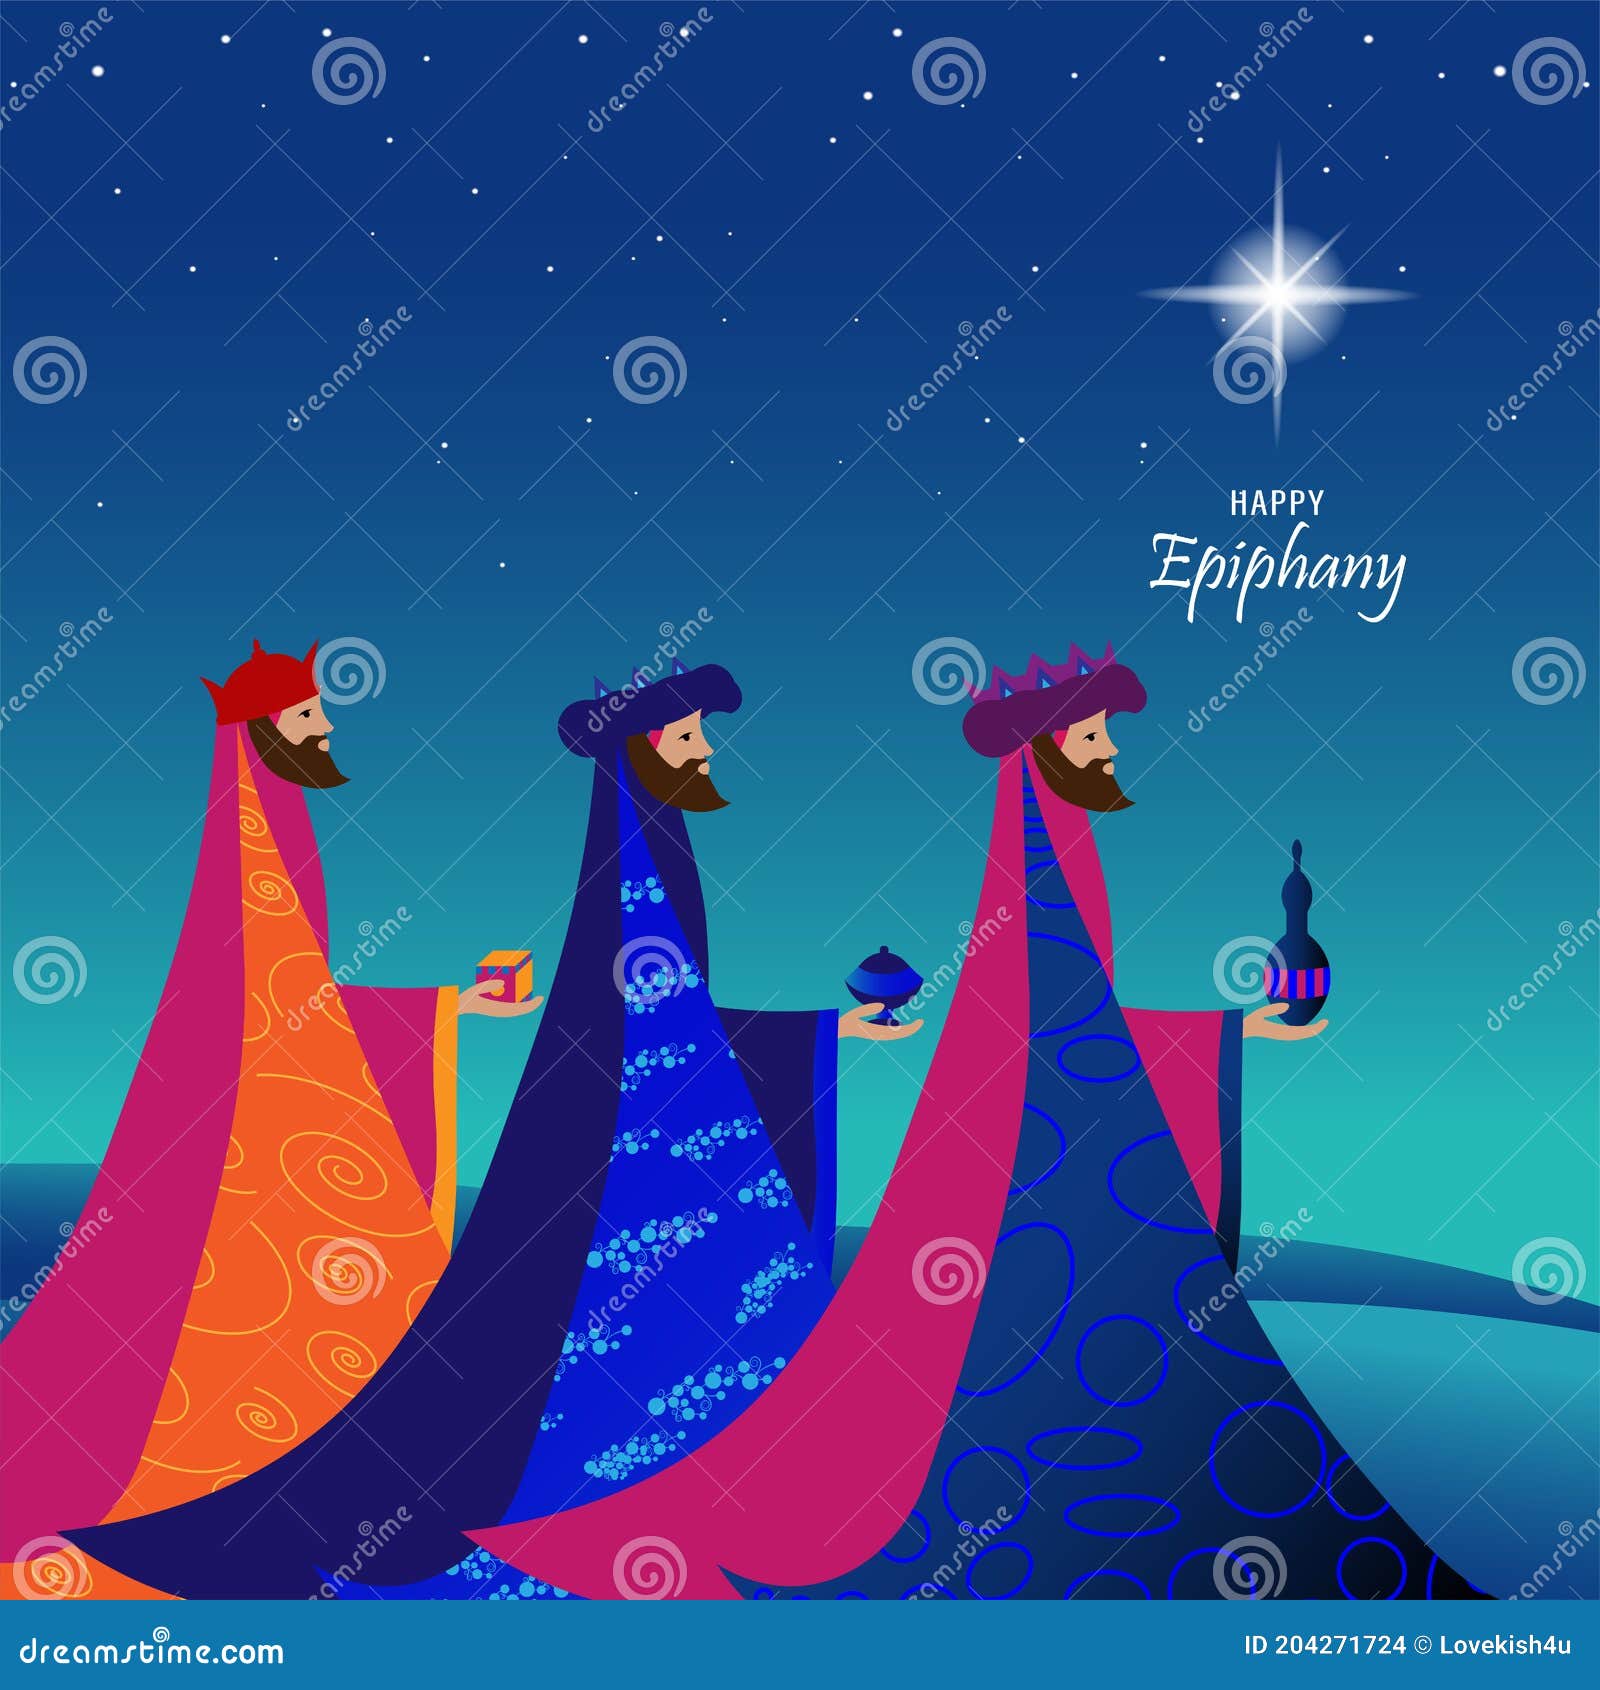 epiphany, a christian festival. jesus christ soon after he was born. abstract 3 kings looking at star in dark night background